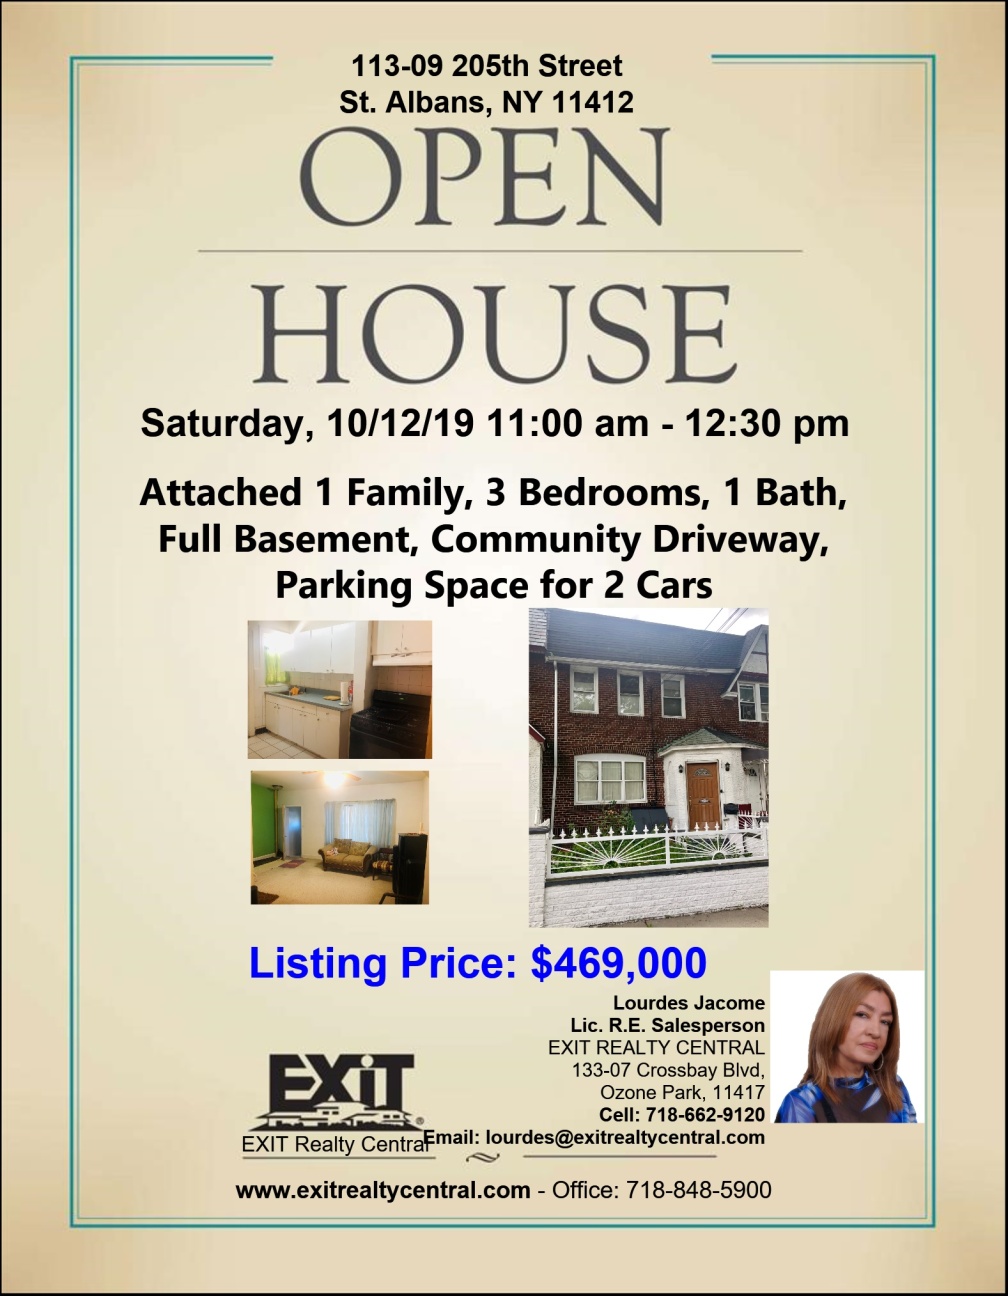 Open House 10/12 in St. Albans from 11am-12:30 pm